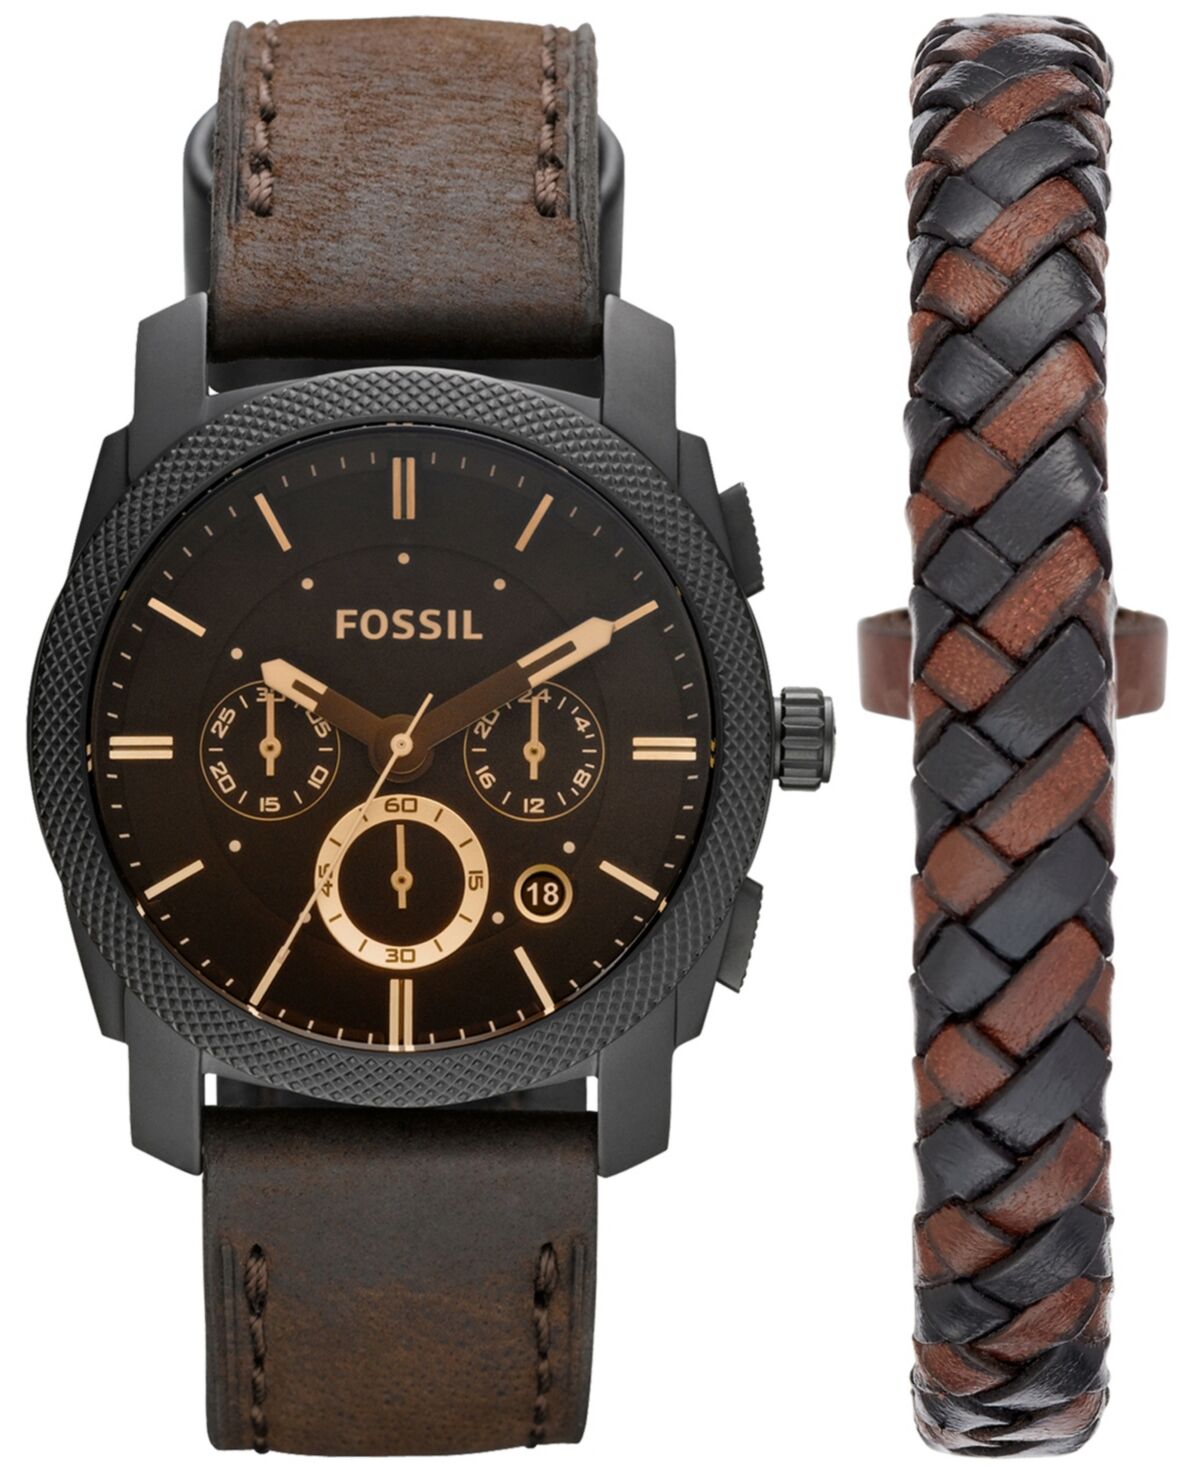 Fossil Machine Chronograph Dark Brown Leather Watch and Bracelet Box Set 42mm - Brown